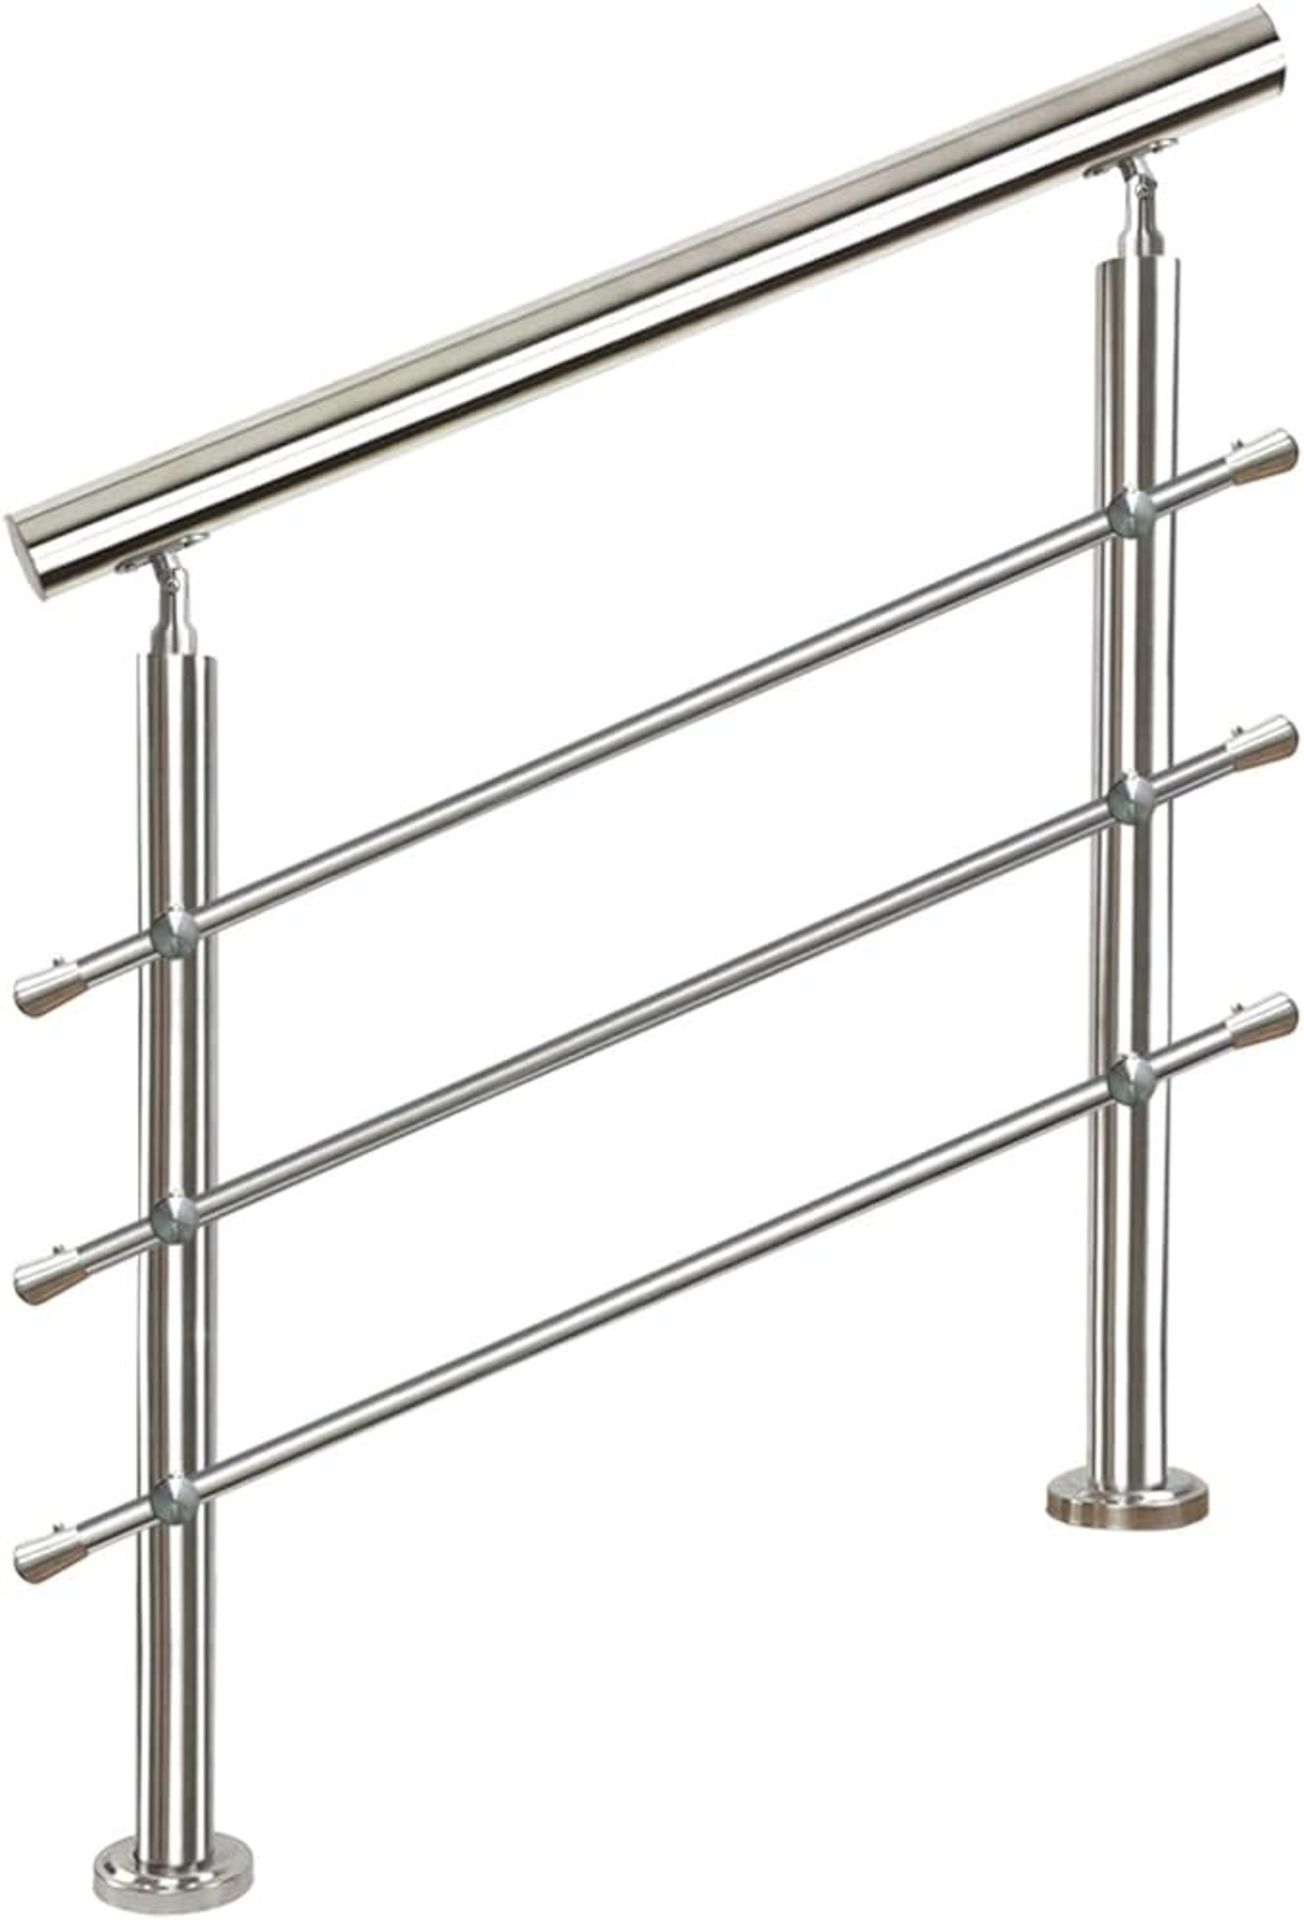 Stainless Steel Handrail for Deck Stairs Indoor Outdoor Safe - ER41